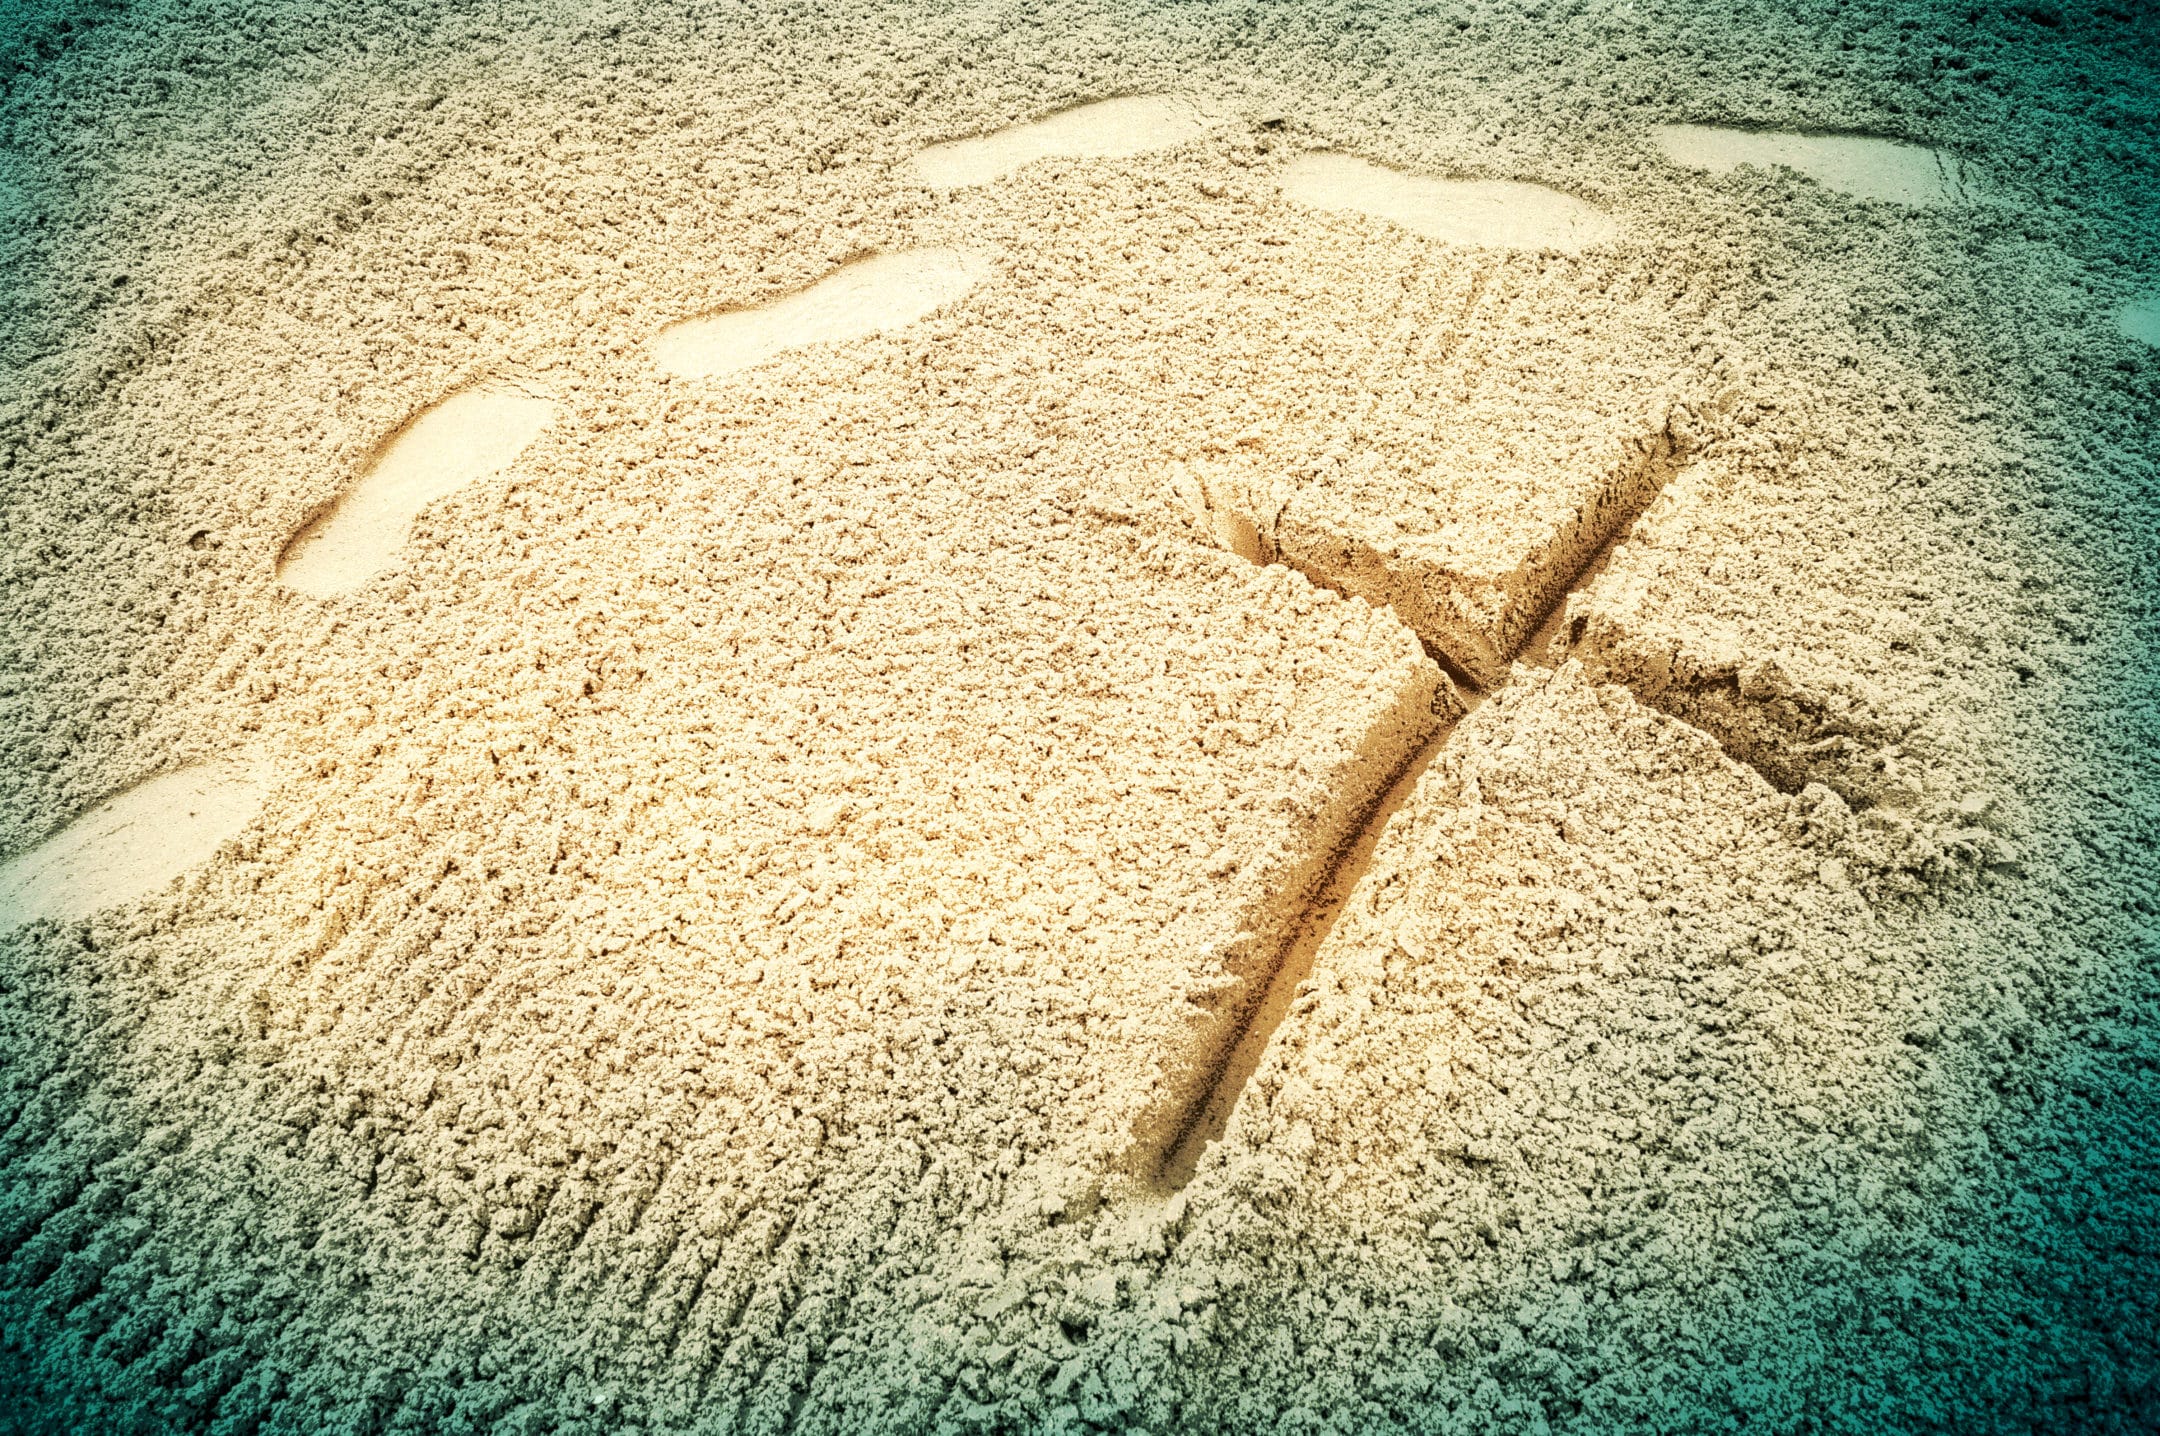 Footsteps near a cross made in the sand